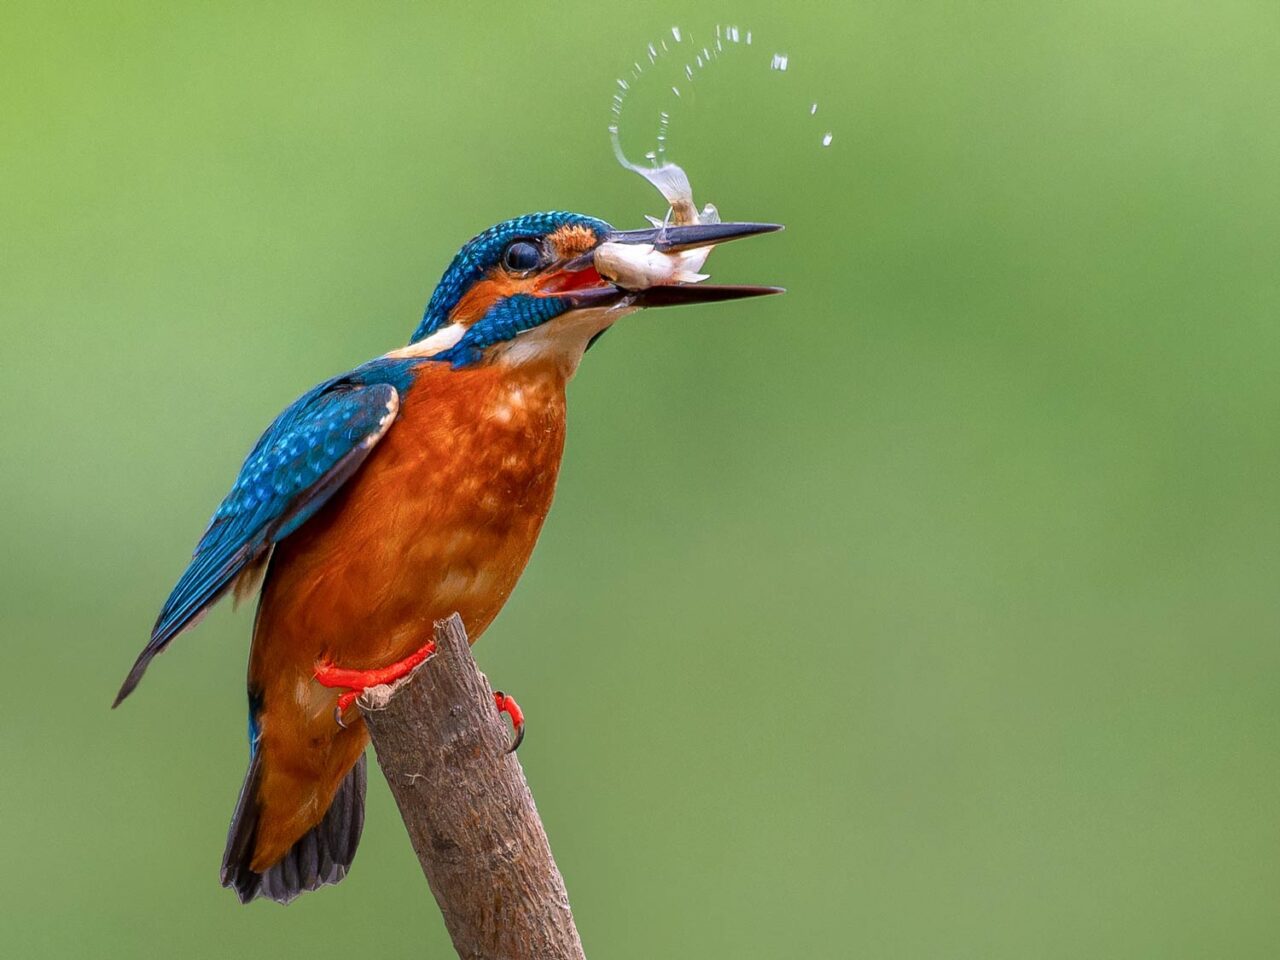 a blue and brown kingfisher holds a freshly caught fish in its beak.